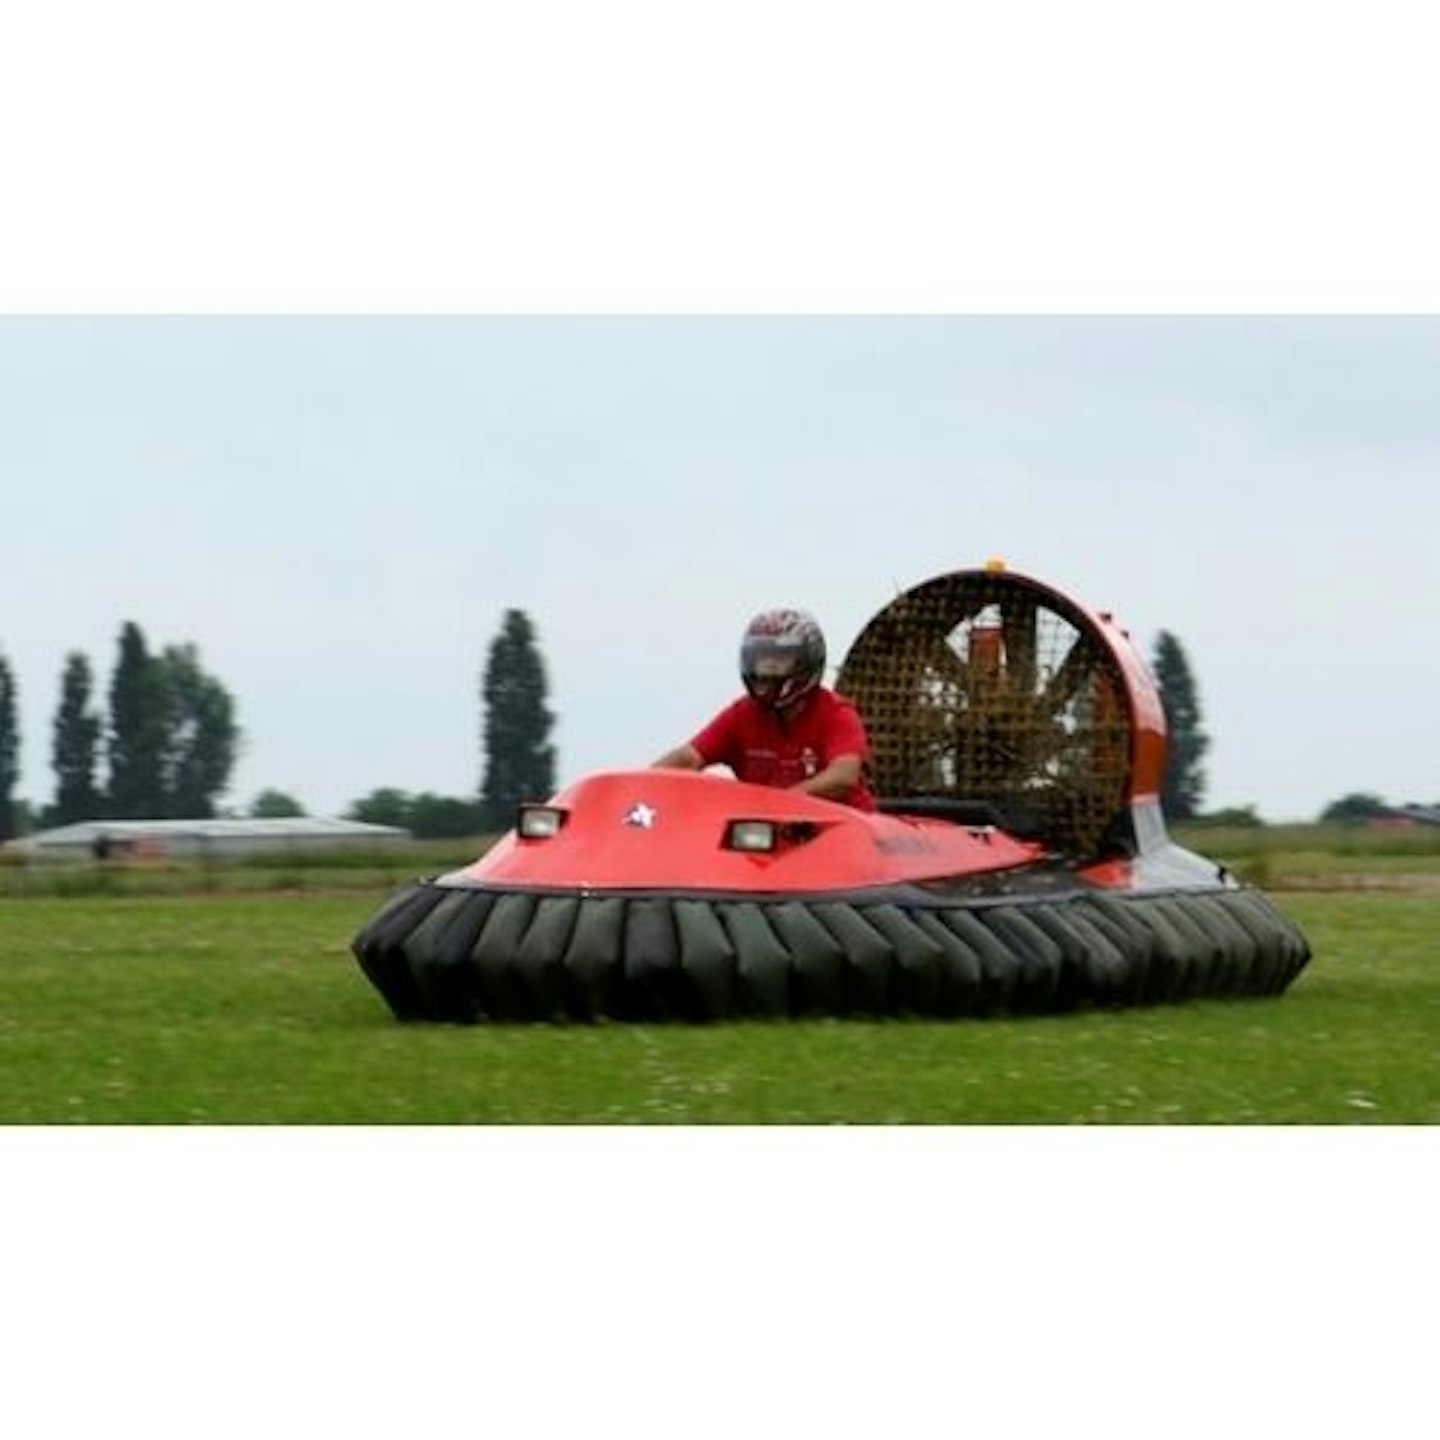 15 Lap Hovercraft Land Experience for One